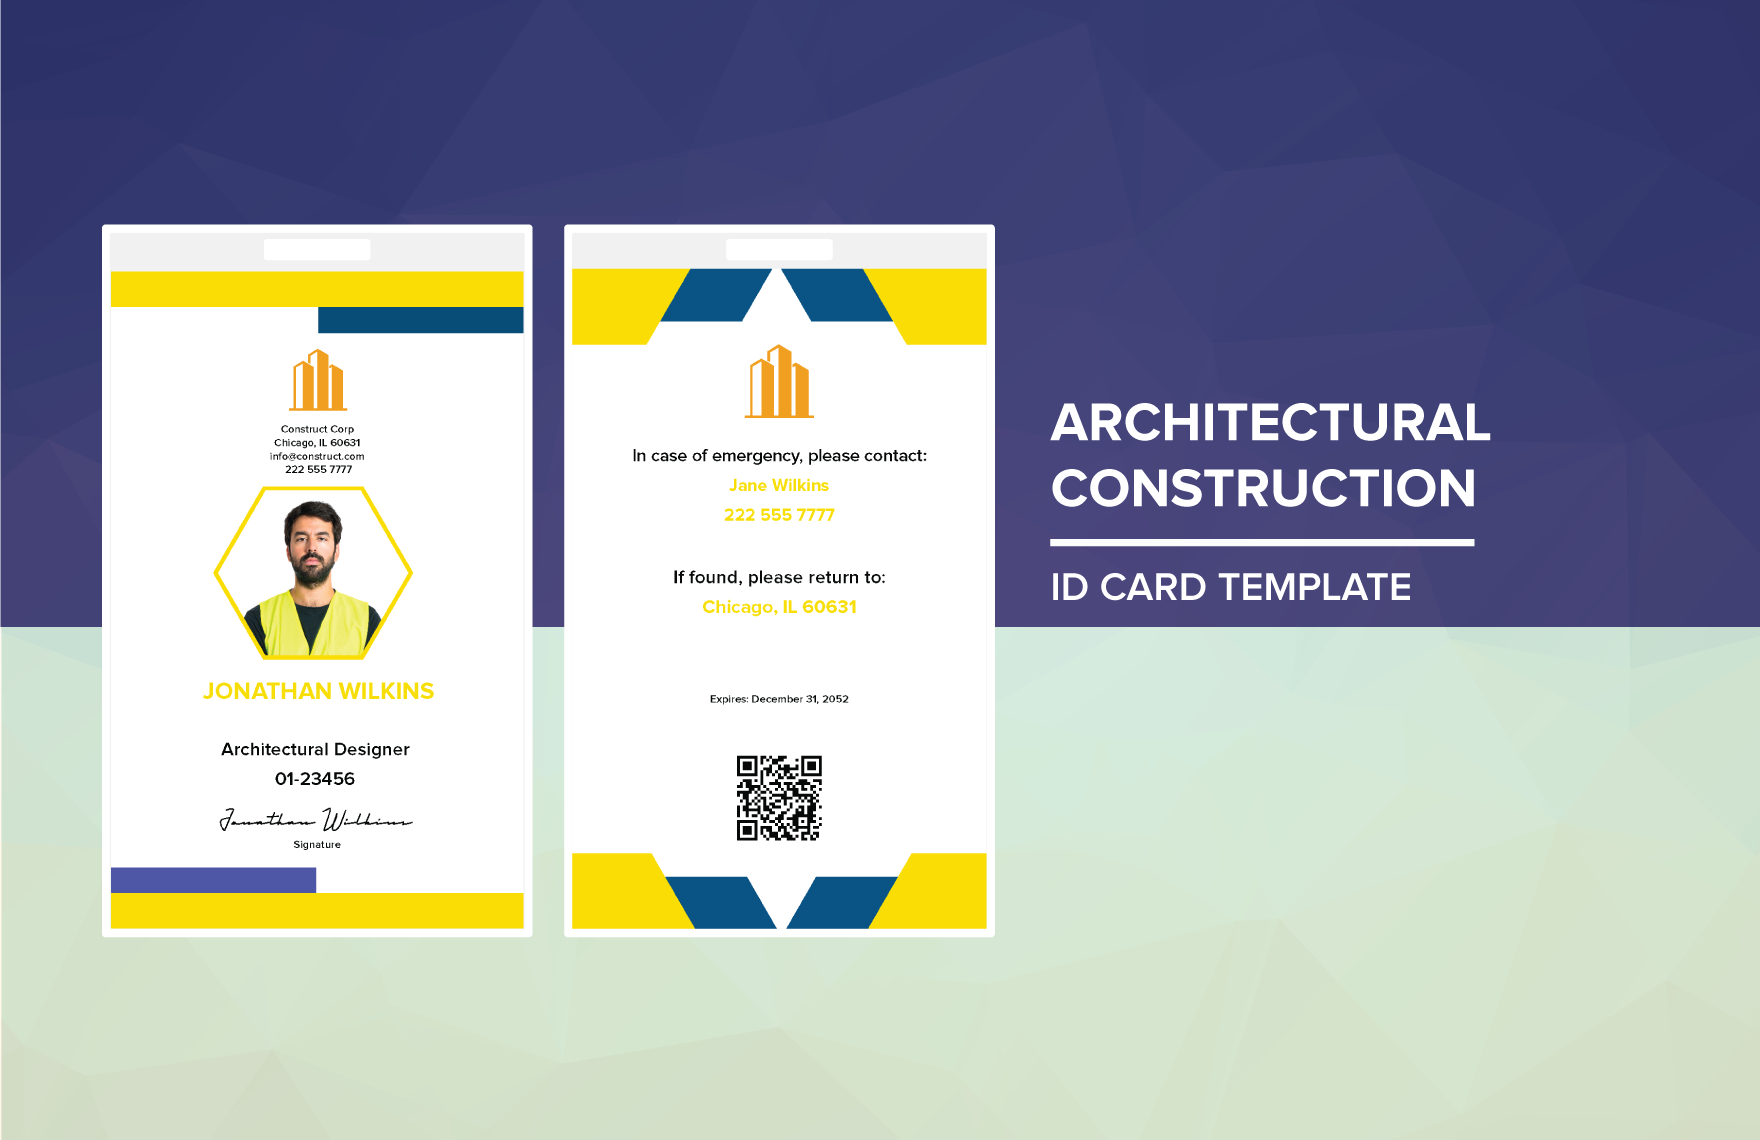 Architectural Construction ID Card